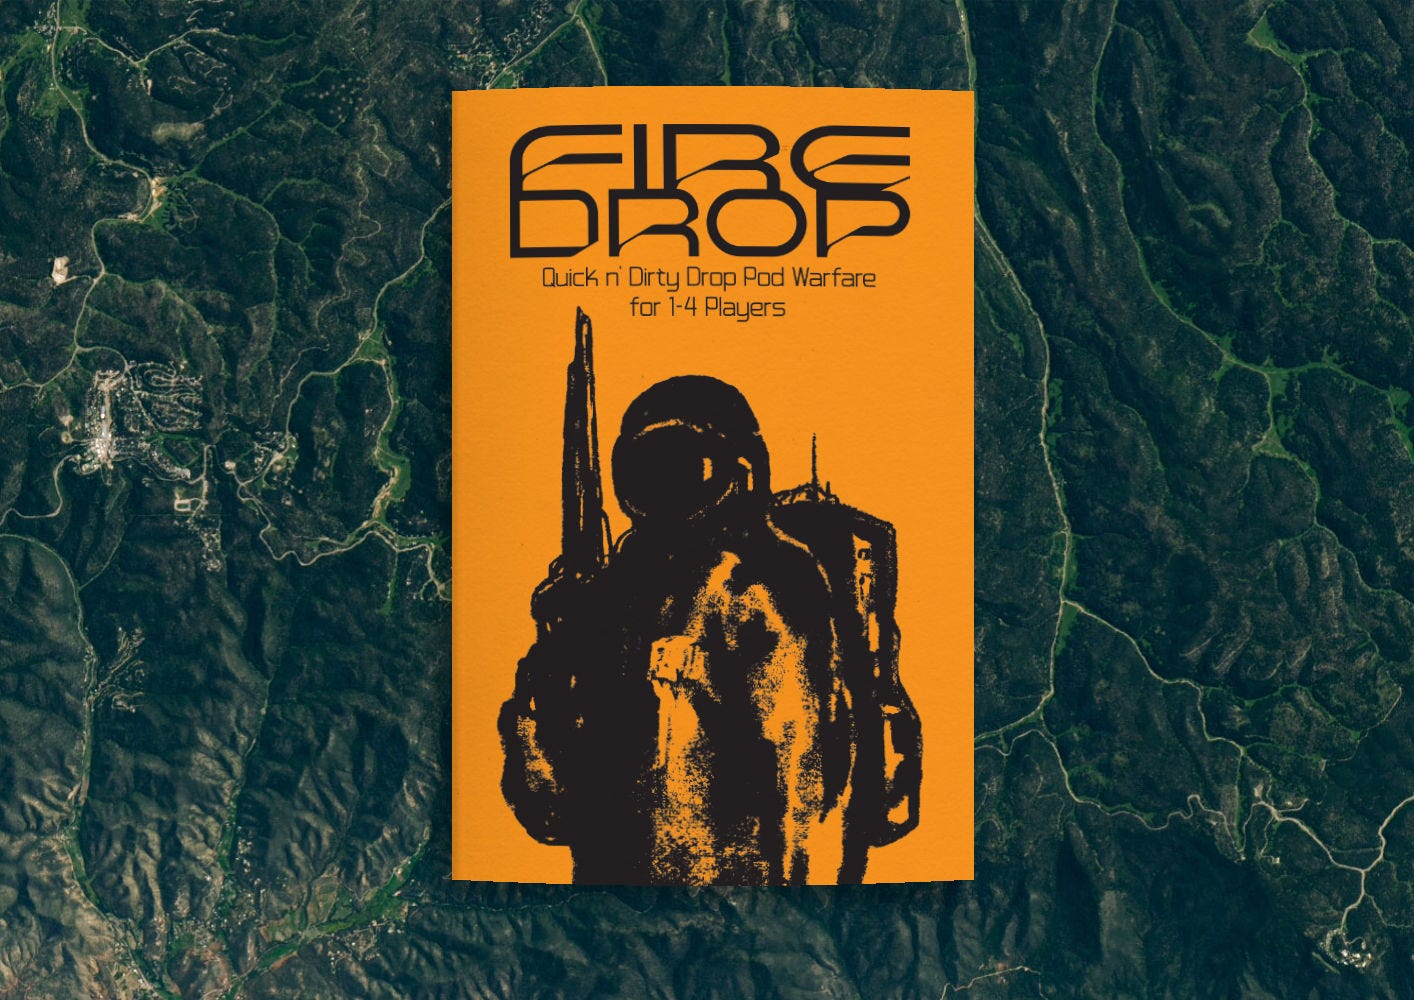 A mockup of a zine with an orange cover and black text reading "FIREDROP Quick N Dirty Drop Pod Warfare for 1-4 Players" alongside a black, smudgy illustration of a soldier in a space suit wielding a rifle.